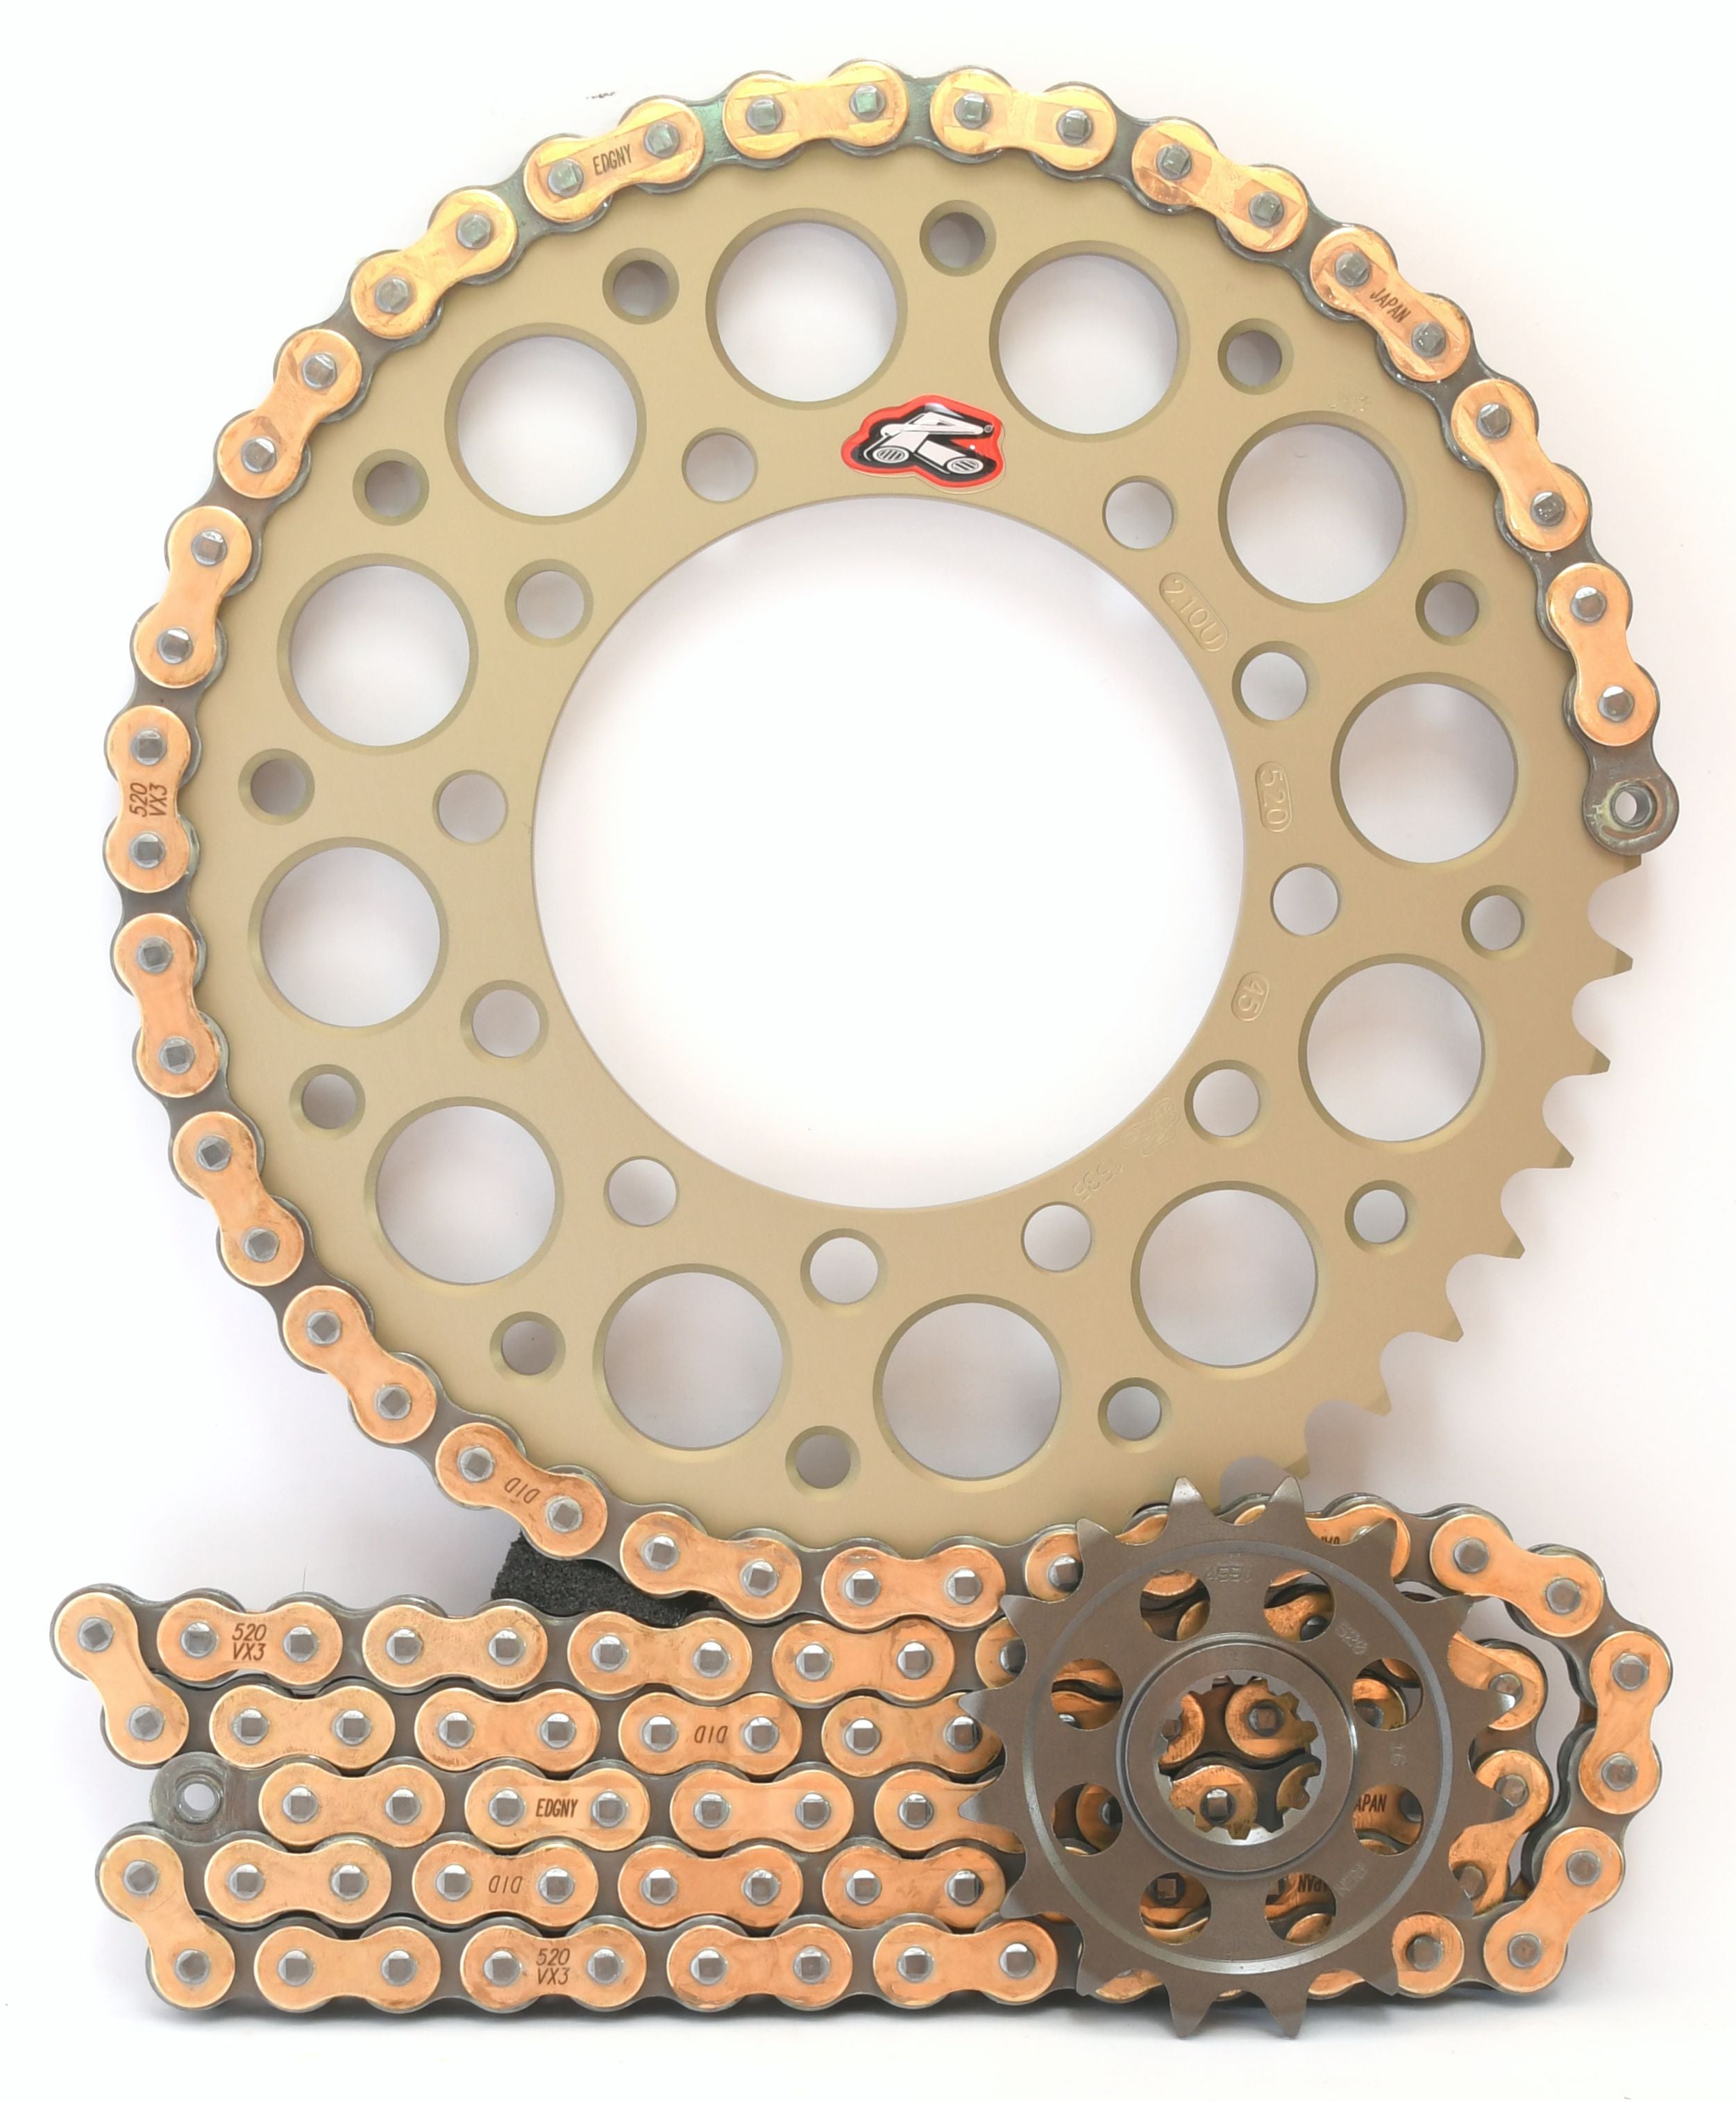 Renthal Ultralight and DID Chain & Sprocket Kit 520 Conversion for Triumph Daytona/Street Triple - Choose Your Gearing